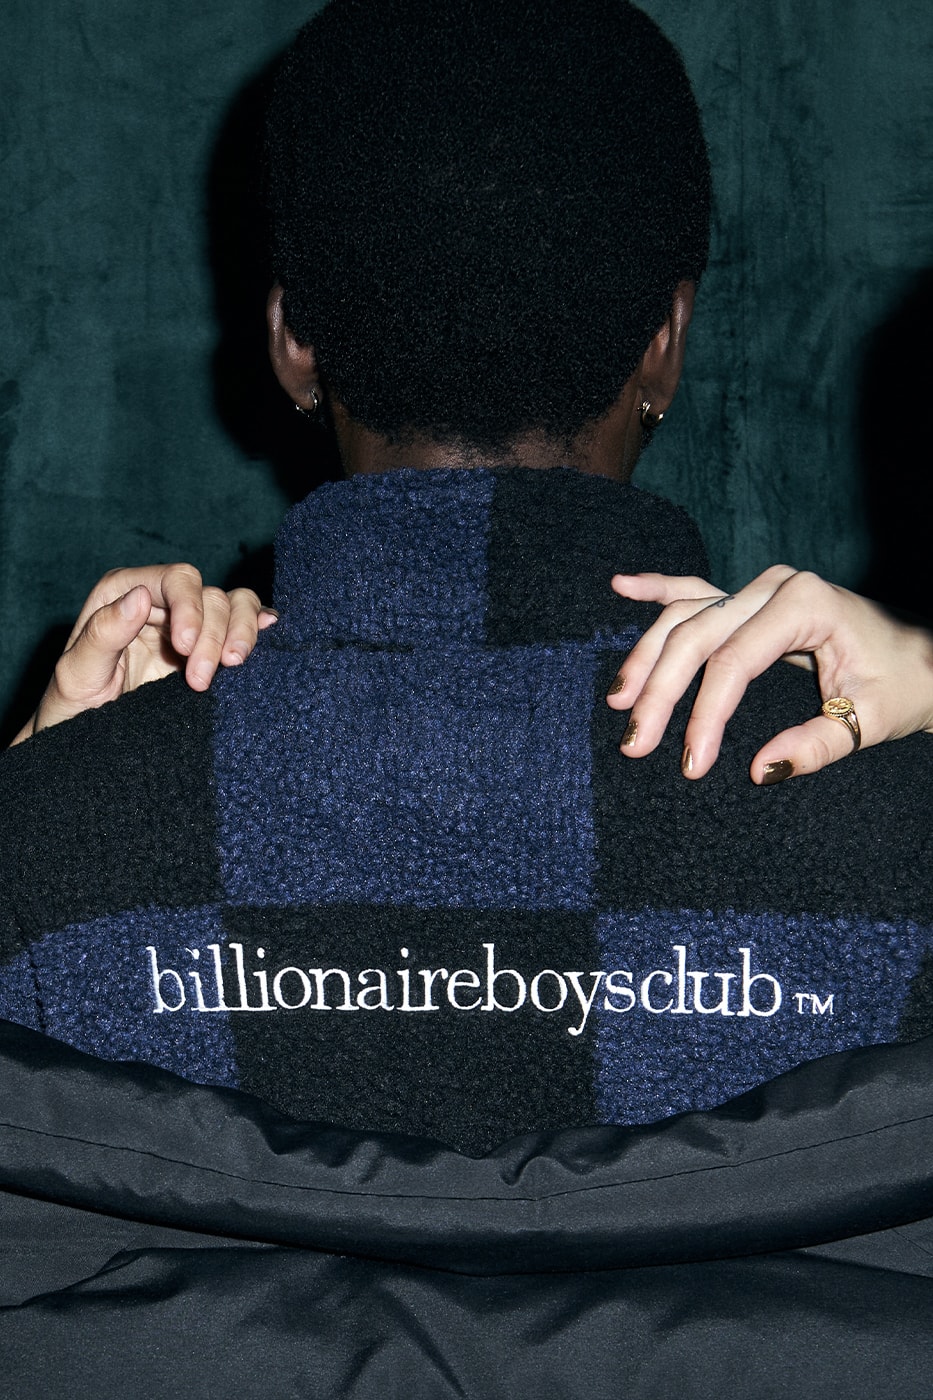 Pharrell Williams BBC Nigo Billionaire Boys Club Continues To Celebrate 20 Years of the Brand's Heritage With Winter 2023 Collection